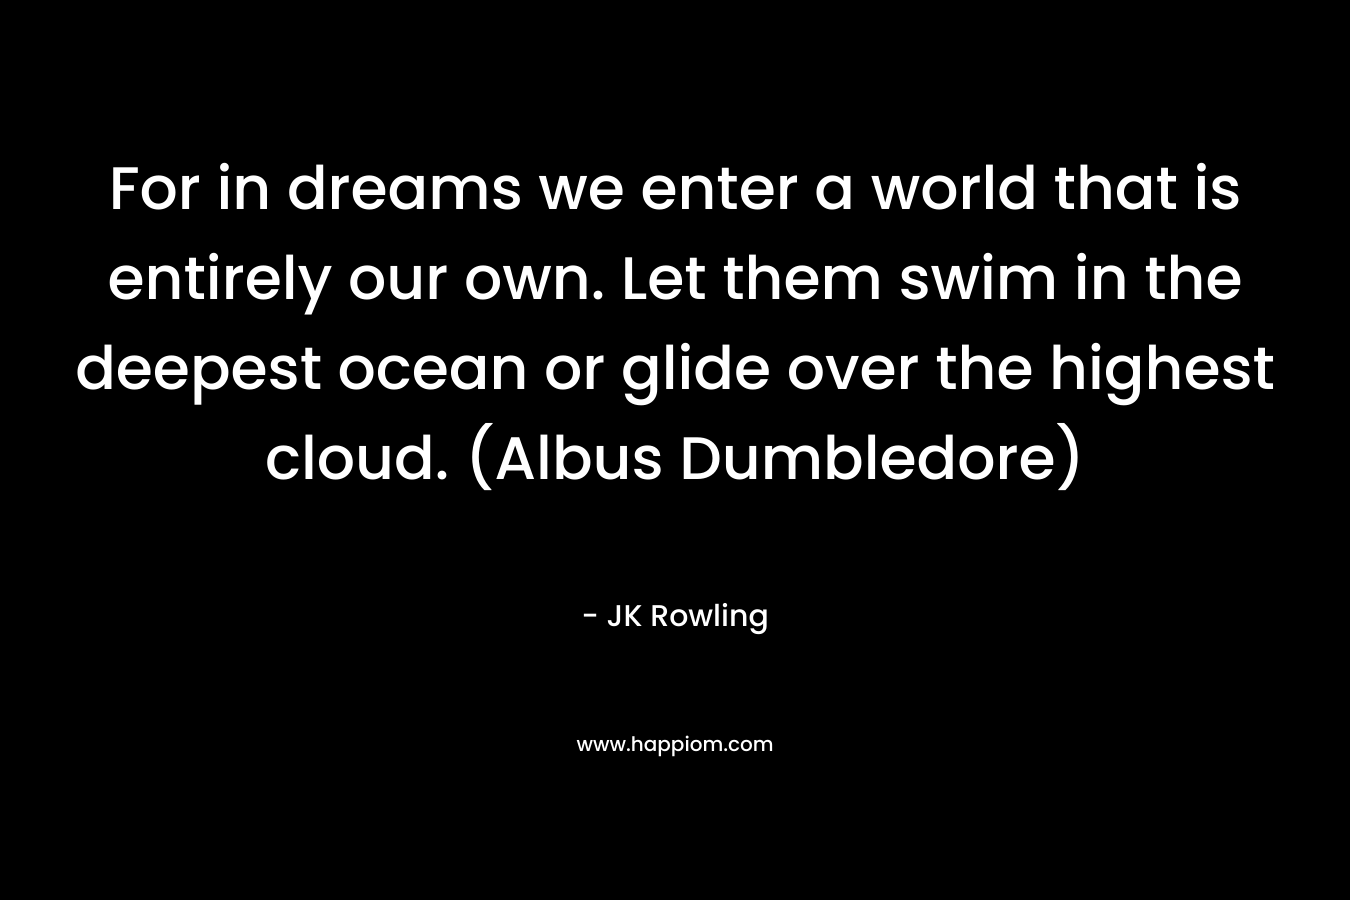 For in dreams we enter a world that is entirely our own. Let them swim in the deepest ocean or glide over the highest cloud. (Albus Dumbledore)